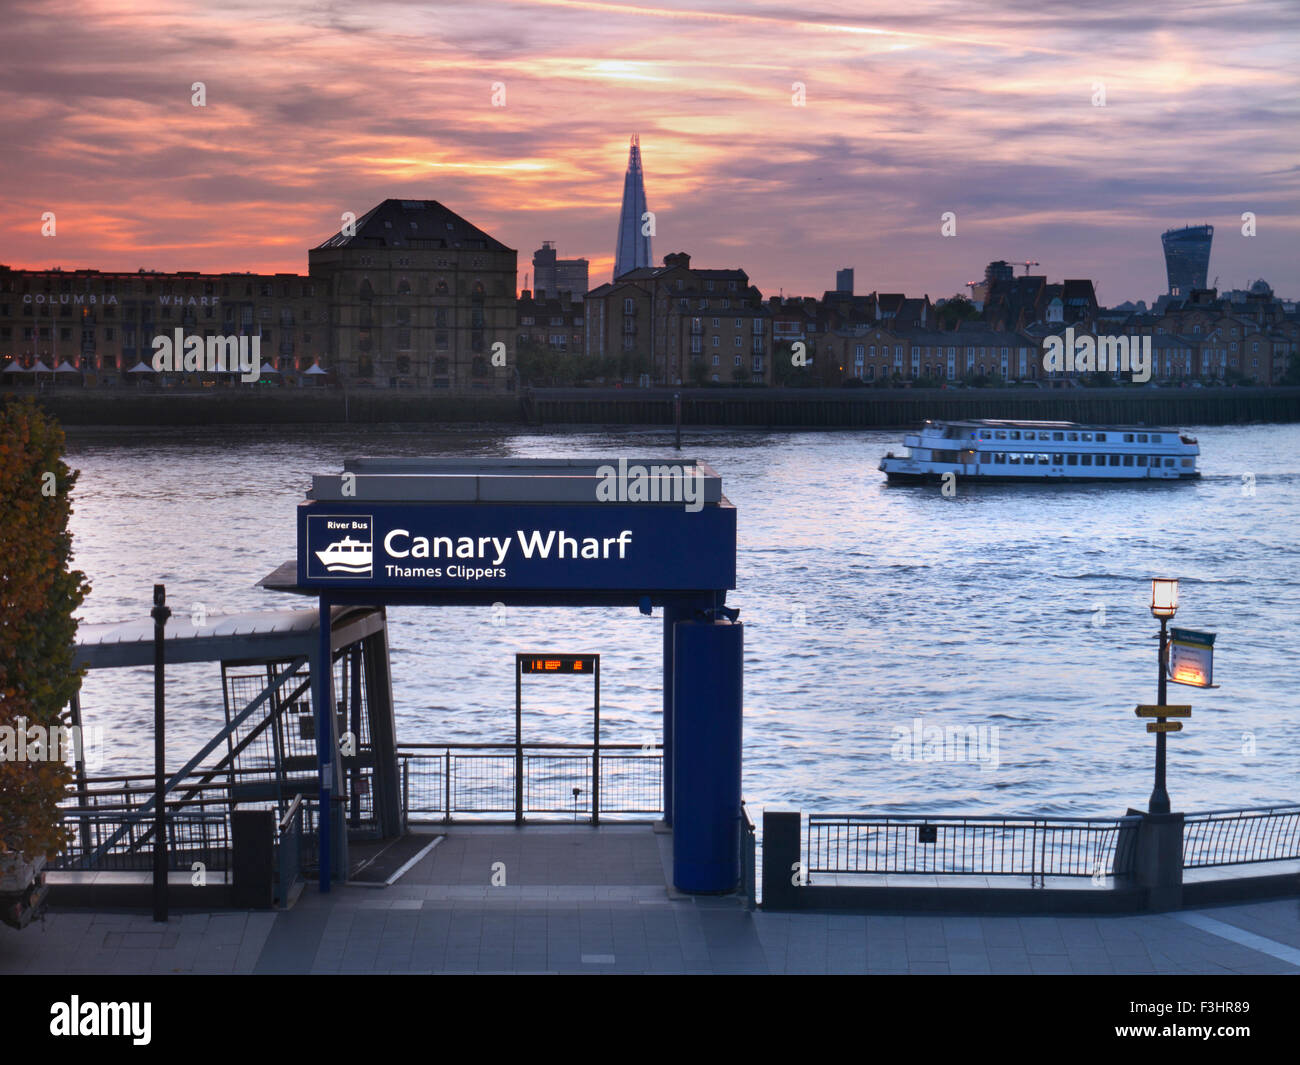 Sunset at Canary Wharf River Boat jetty with pleasure boat London Shard and 'Walkie Talkie' building in background London E14 Stock Photo